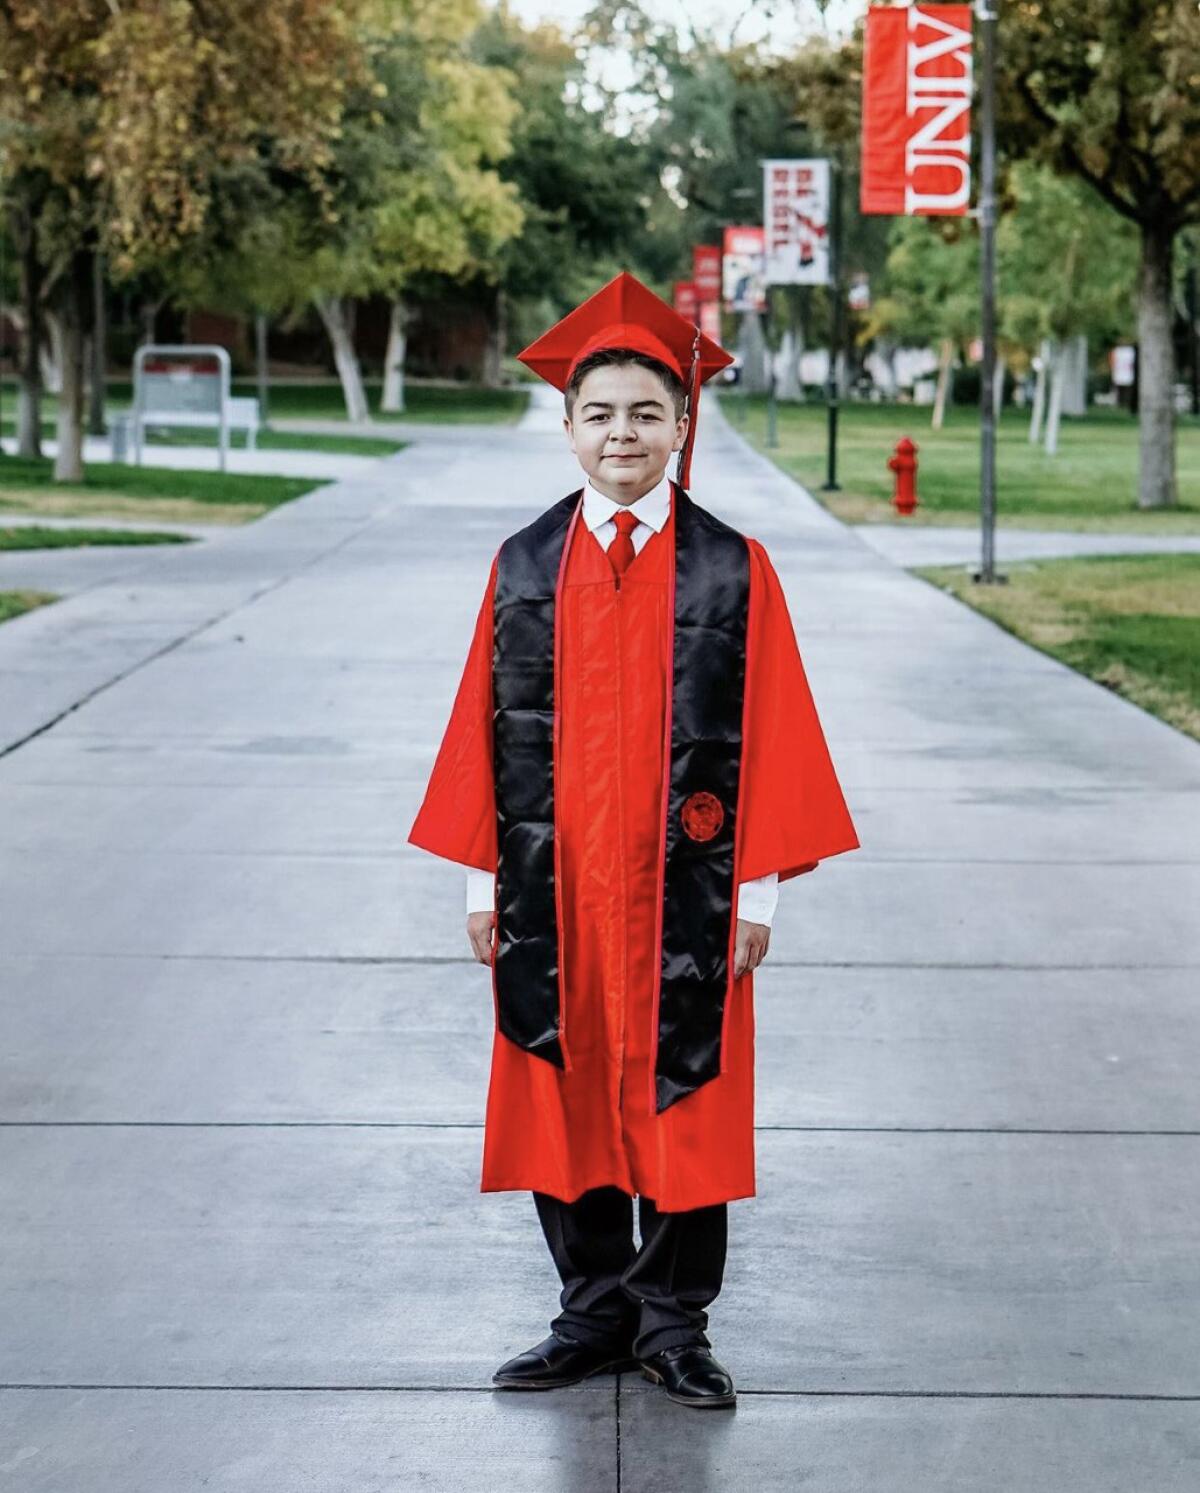 Jack Rico, 15, earned his fifth college degree when he graduated from UNLV.